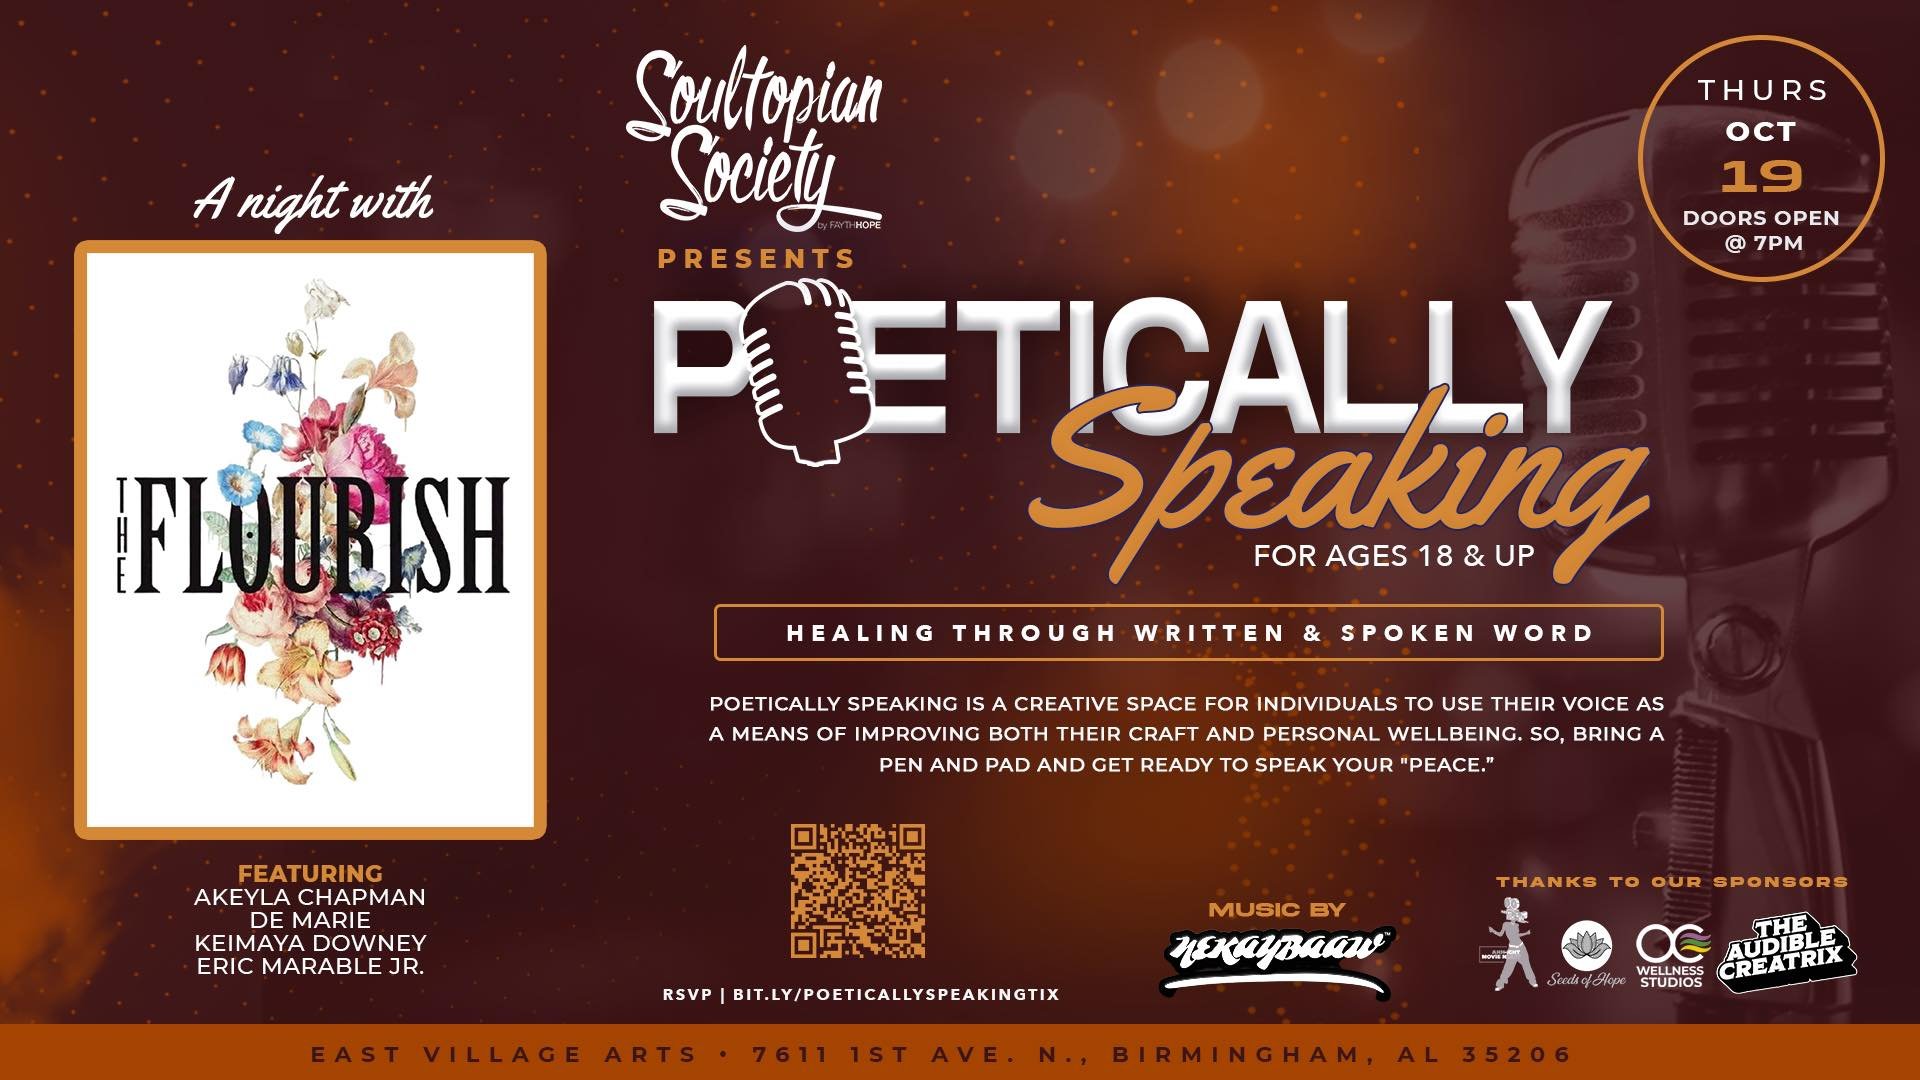 What&rsquo;s good Soultopians?! We will be joining forces with The Flourish for the October edition of #PoeticallySpeaking! Come join us at East Village Arts on Thursday, Oct. 19th at 7:30pm to see dopeness personified. Visit link below to RSVP!
🤘🏾